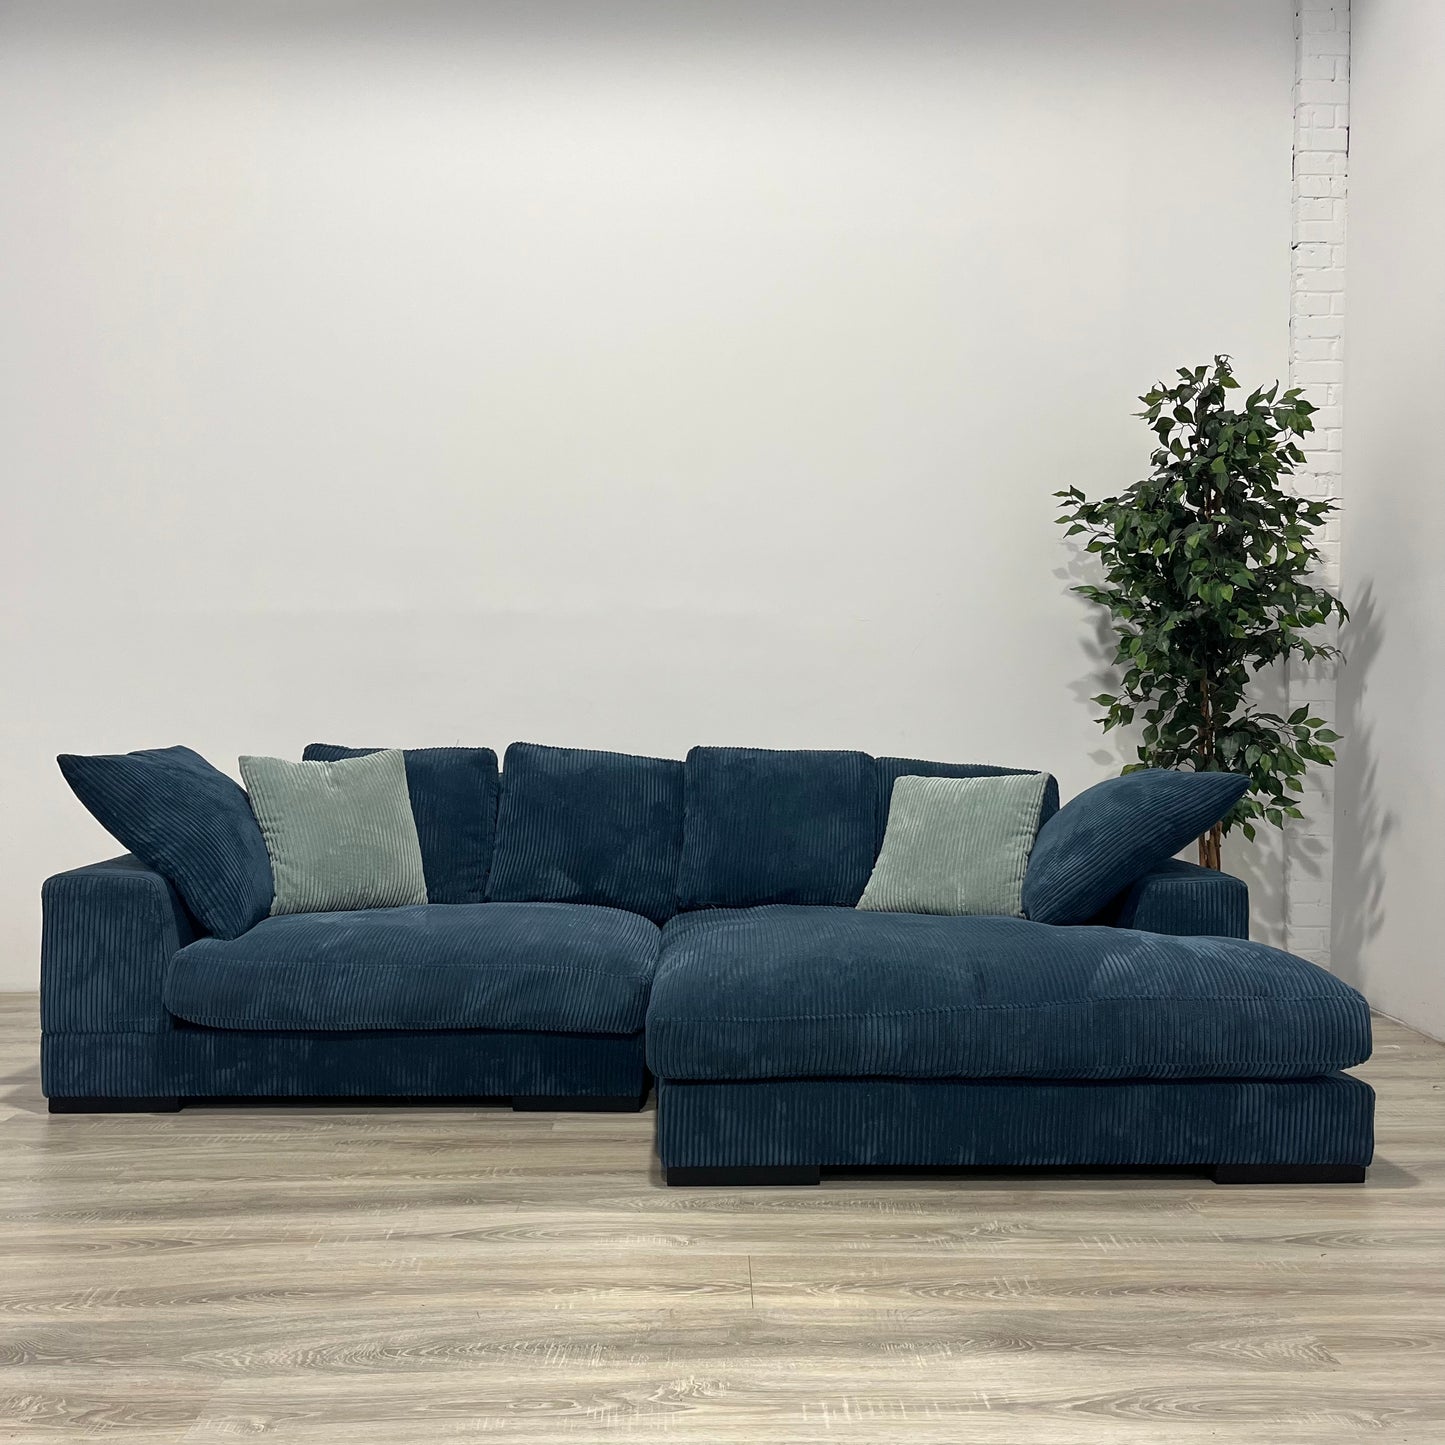 The Plunge Sectional